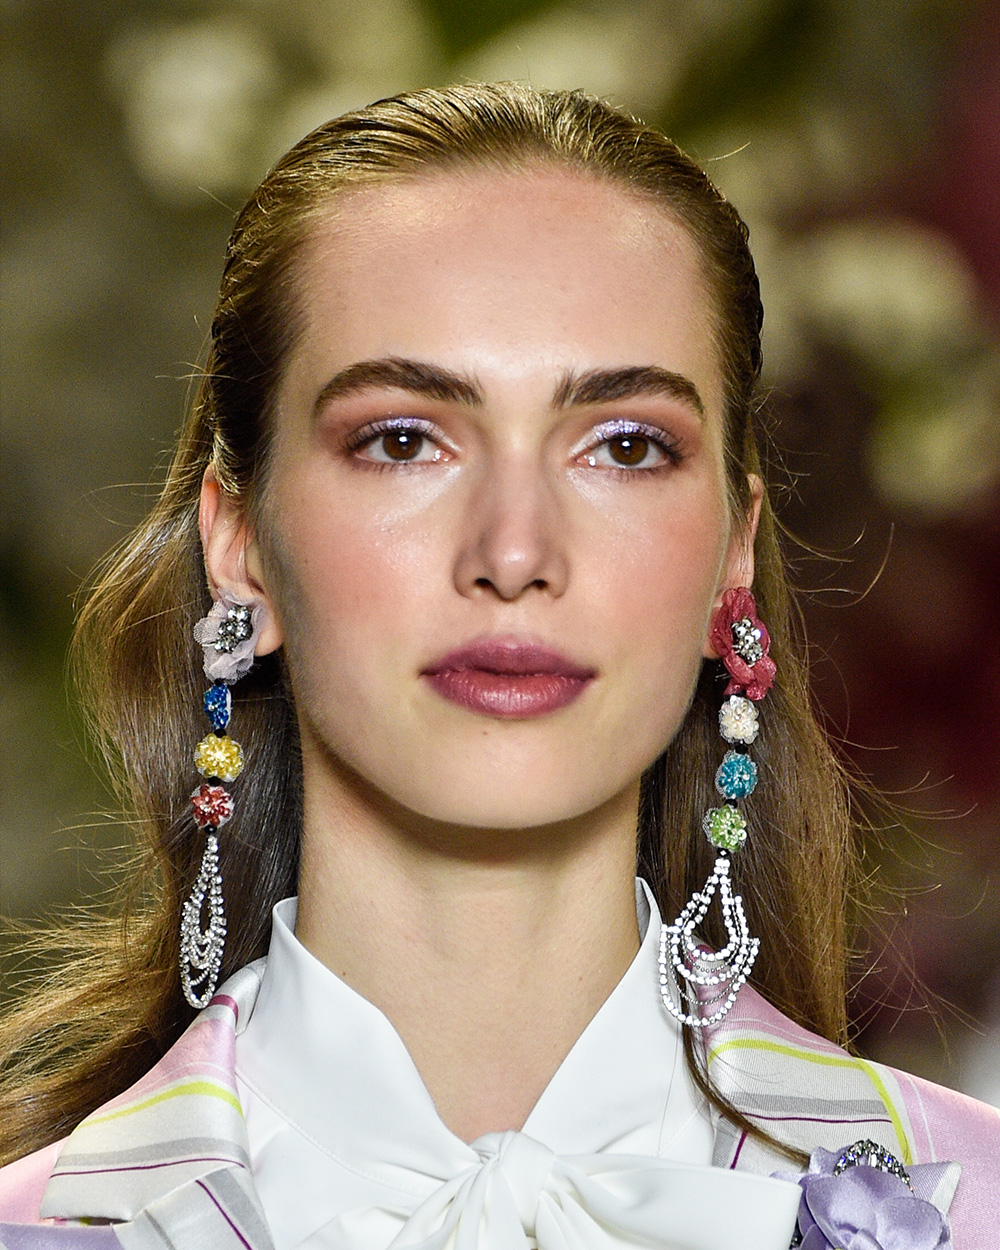 The best beauty looks from NYFW | Badgley Mishka Iridescent lids made a statement at Badgley Mishka this NYFW, paired with peach blush and pink lips.